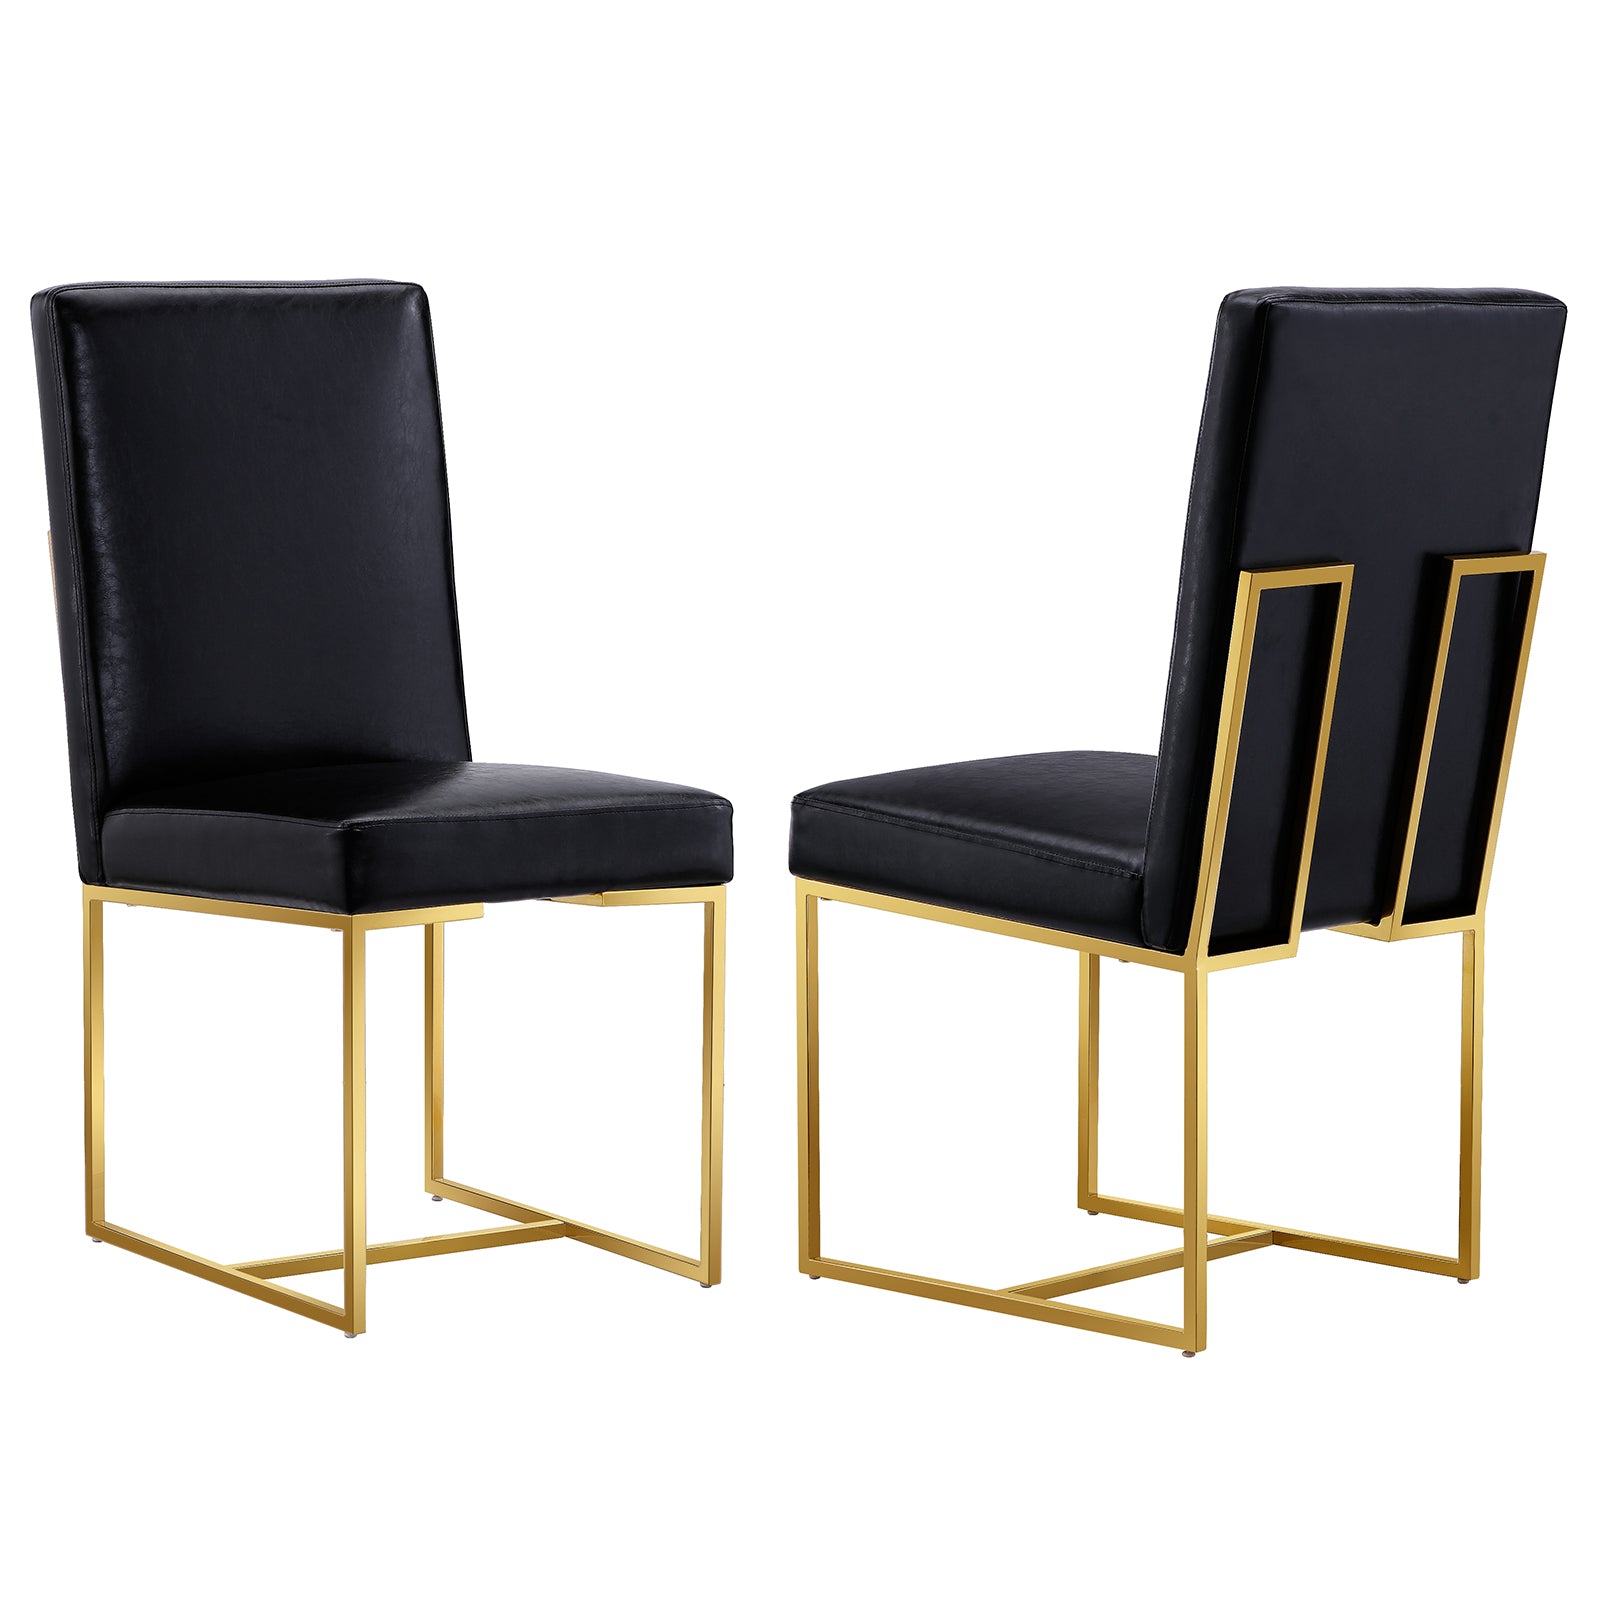 AUZ Black and Gold Leather Dining Chairs: A Perfect Blend of Elegance and Sophistication